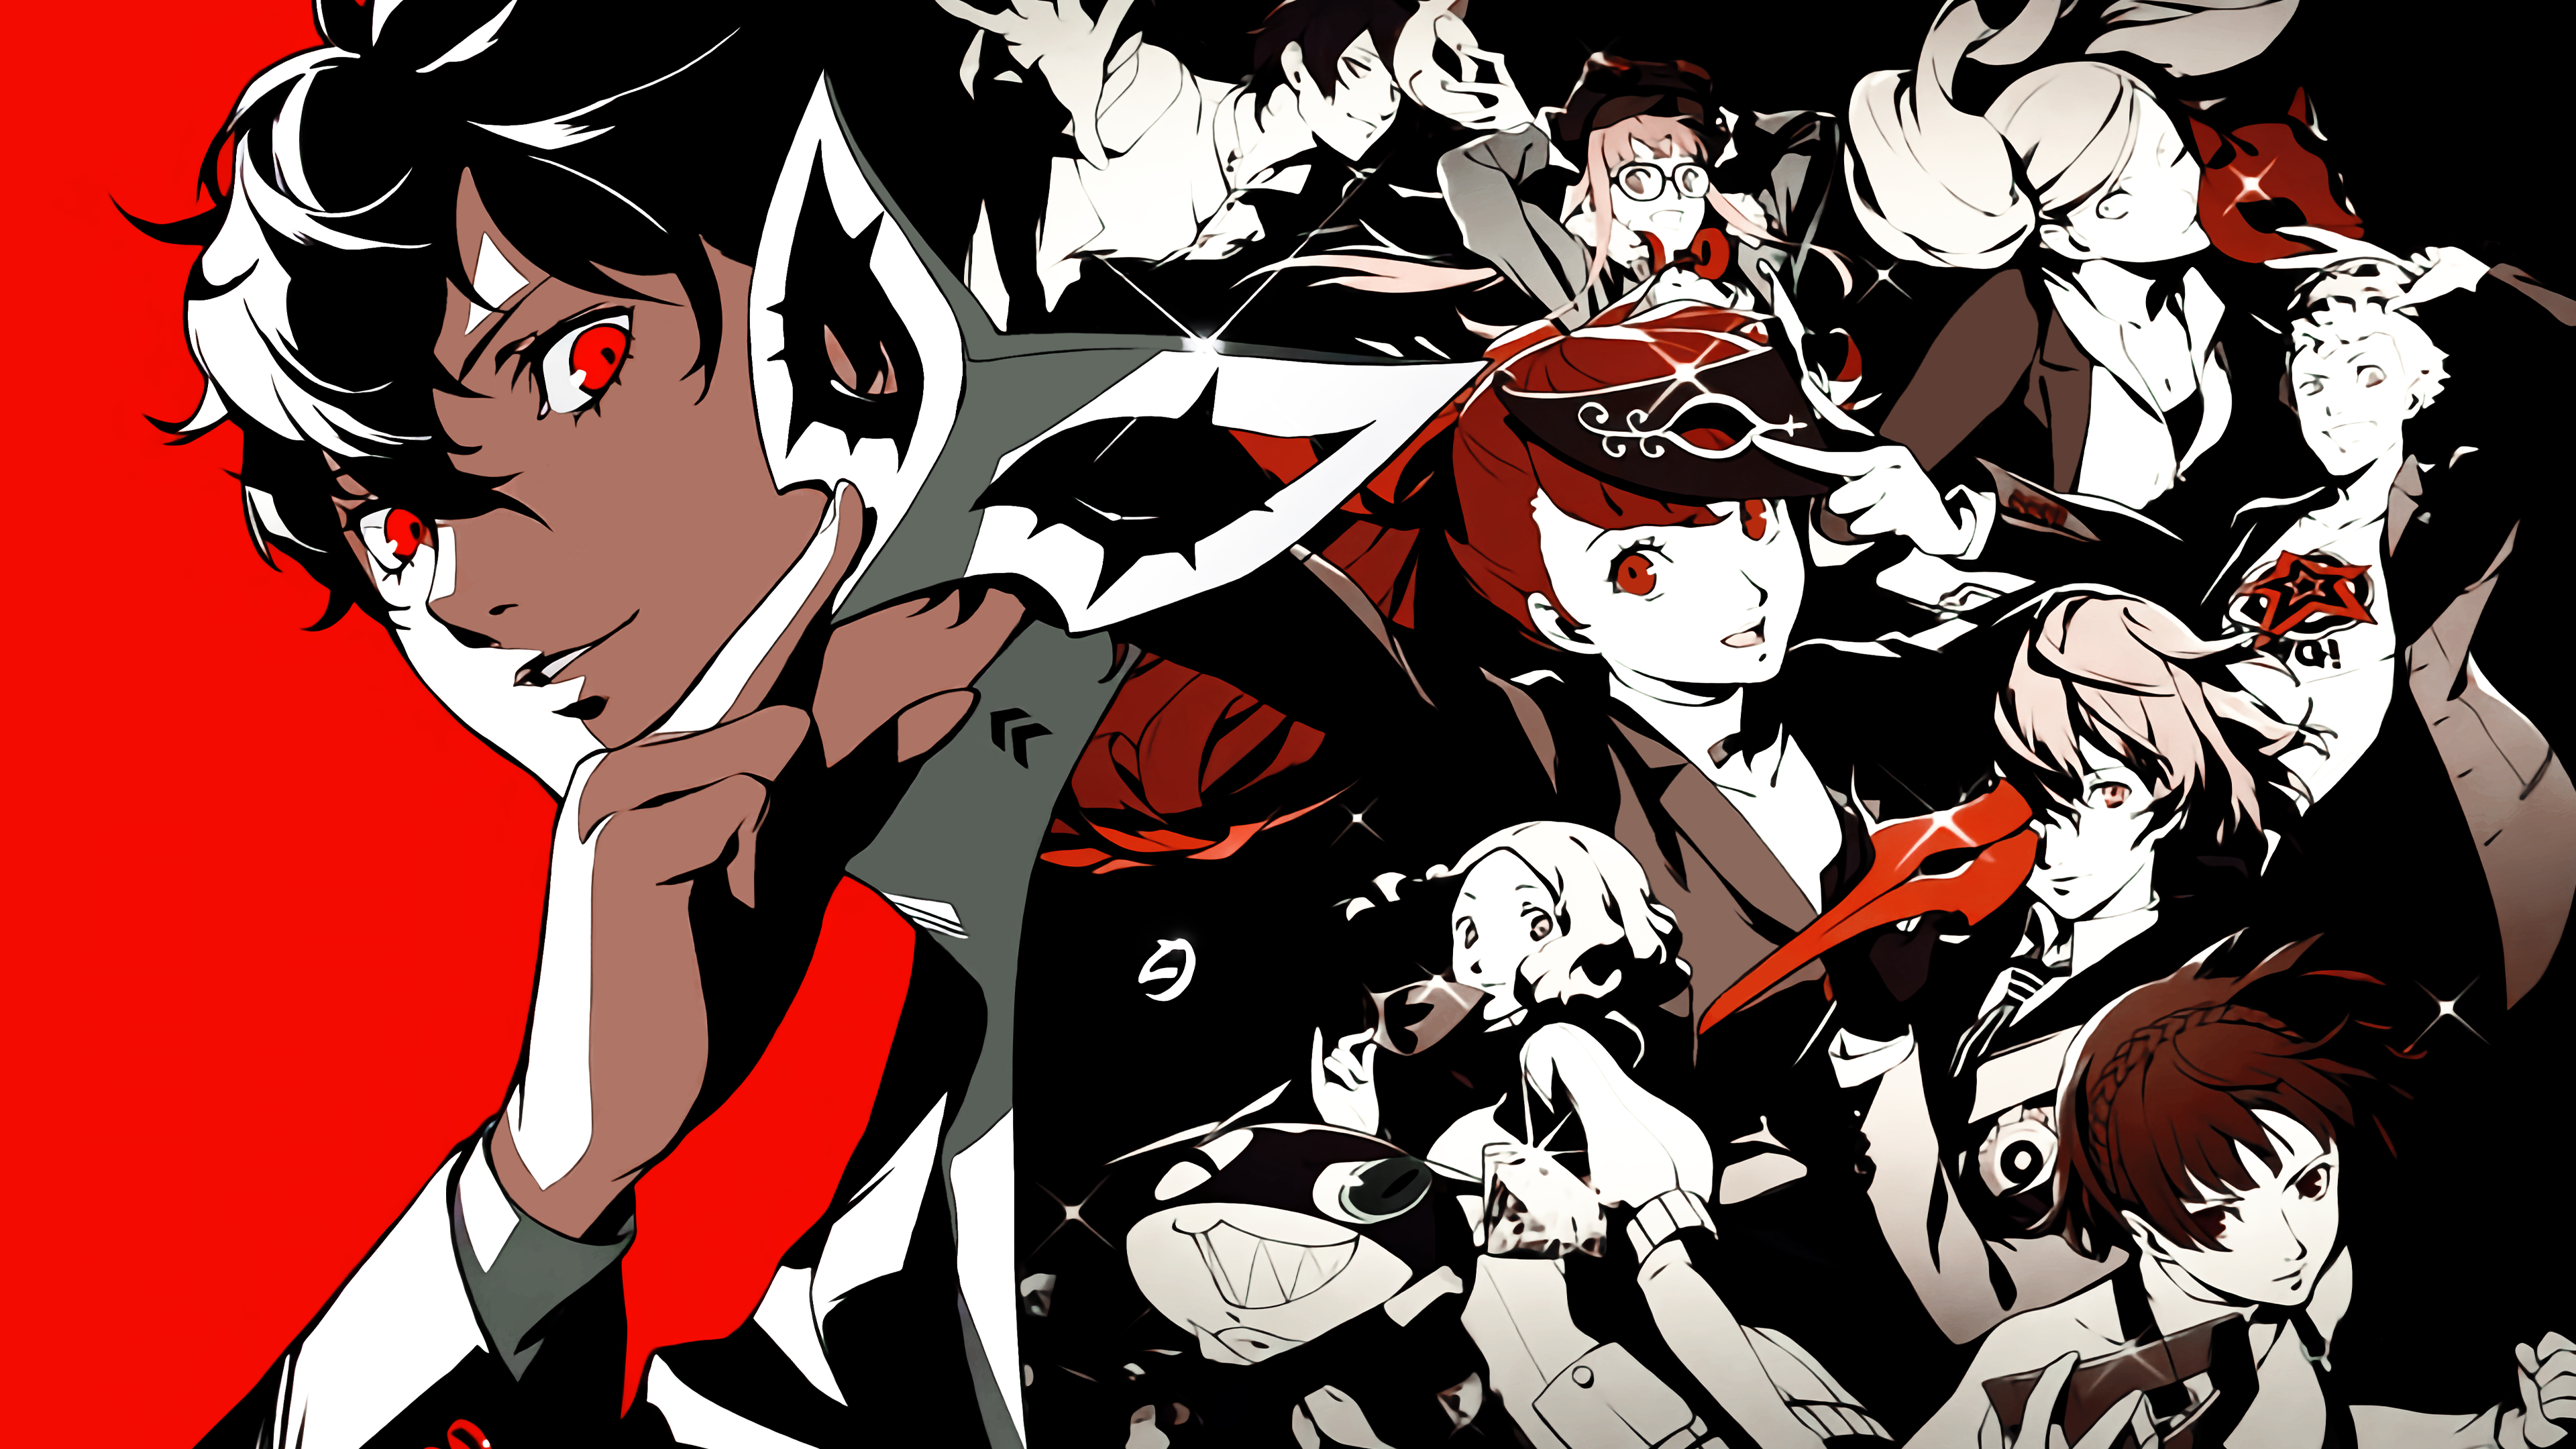 Persona 5 Royal: What is the release date? 